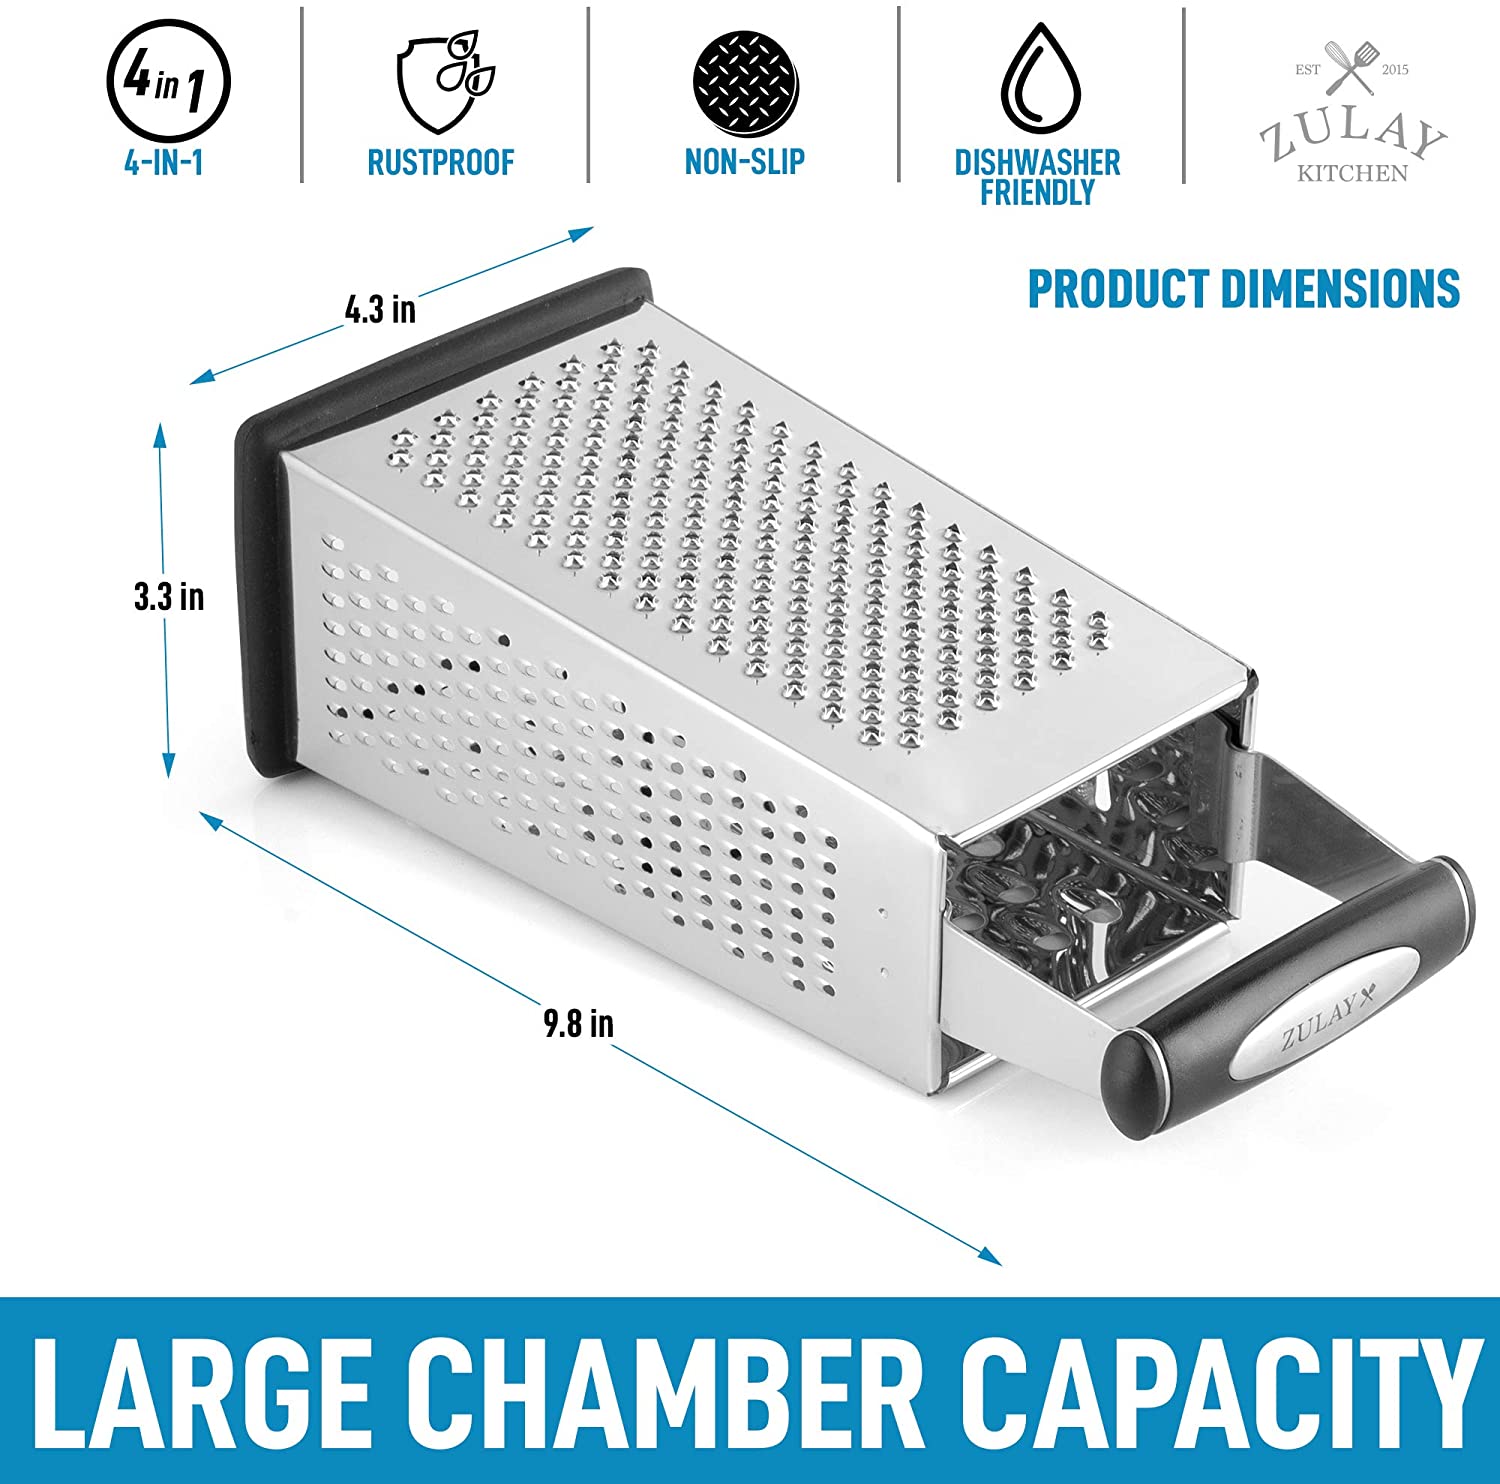 Cheese Grater, Handheld Kitchen Grater With Long Stainless Steel